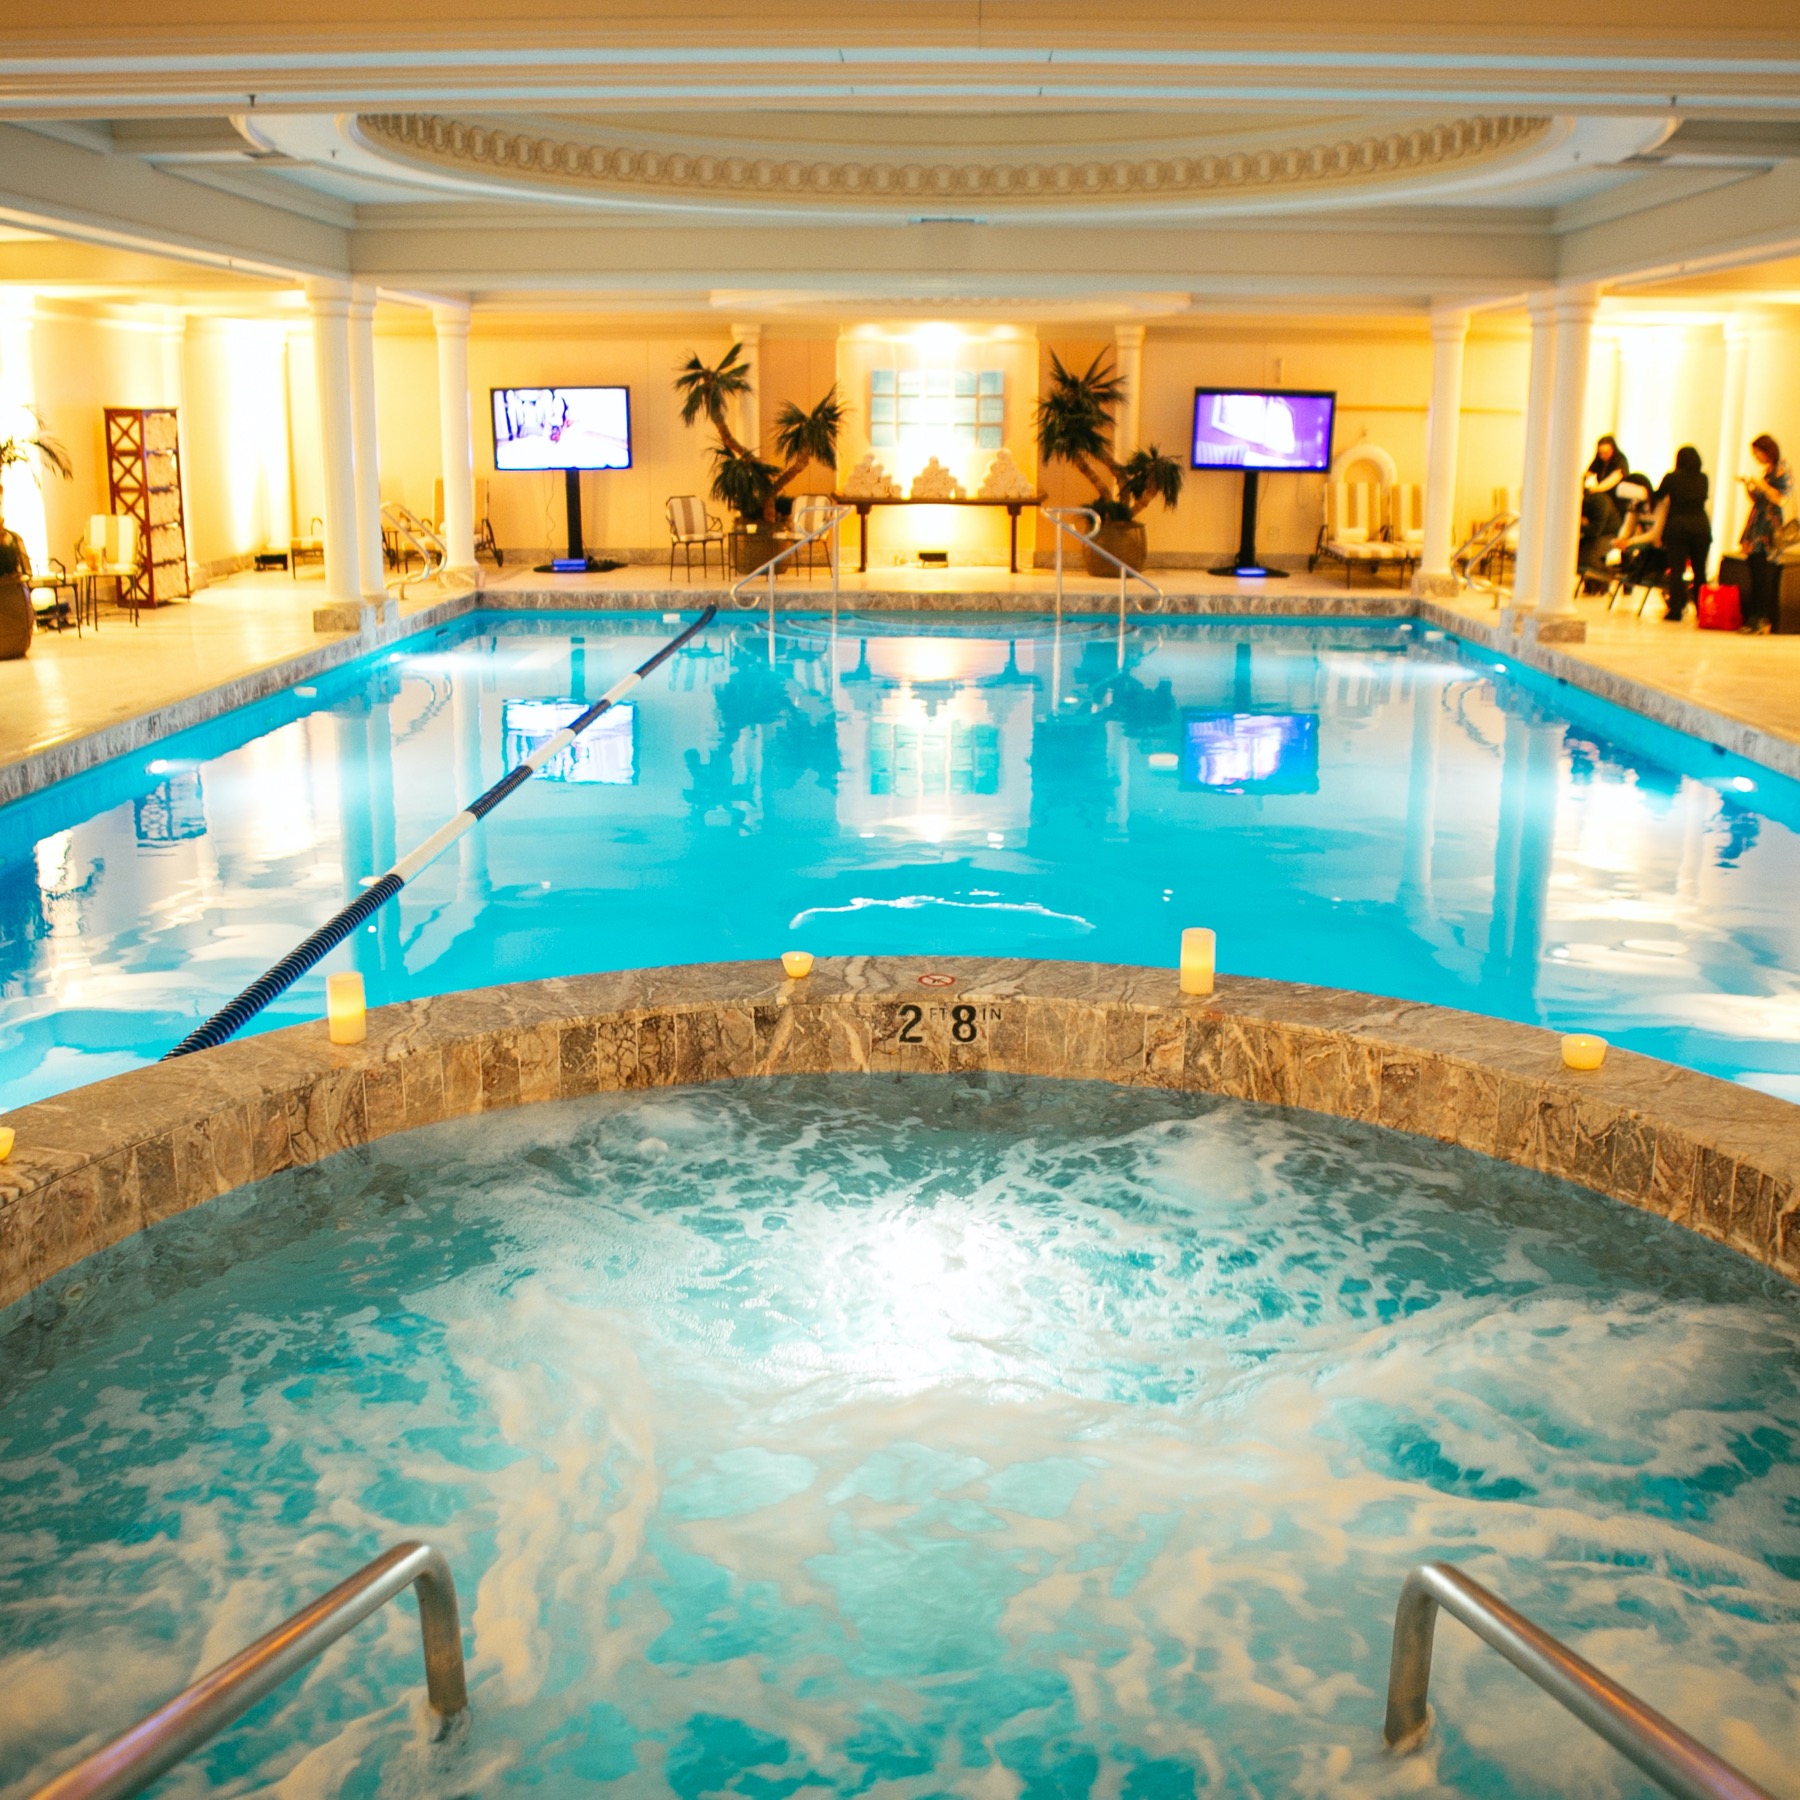 Chicago's top 5 kid-friendly hotel pools | Choose Chicago